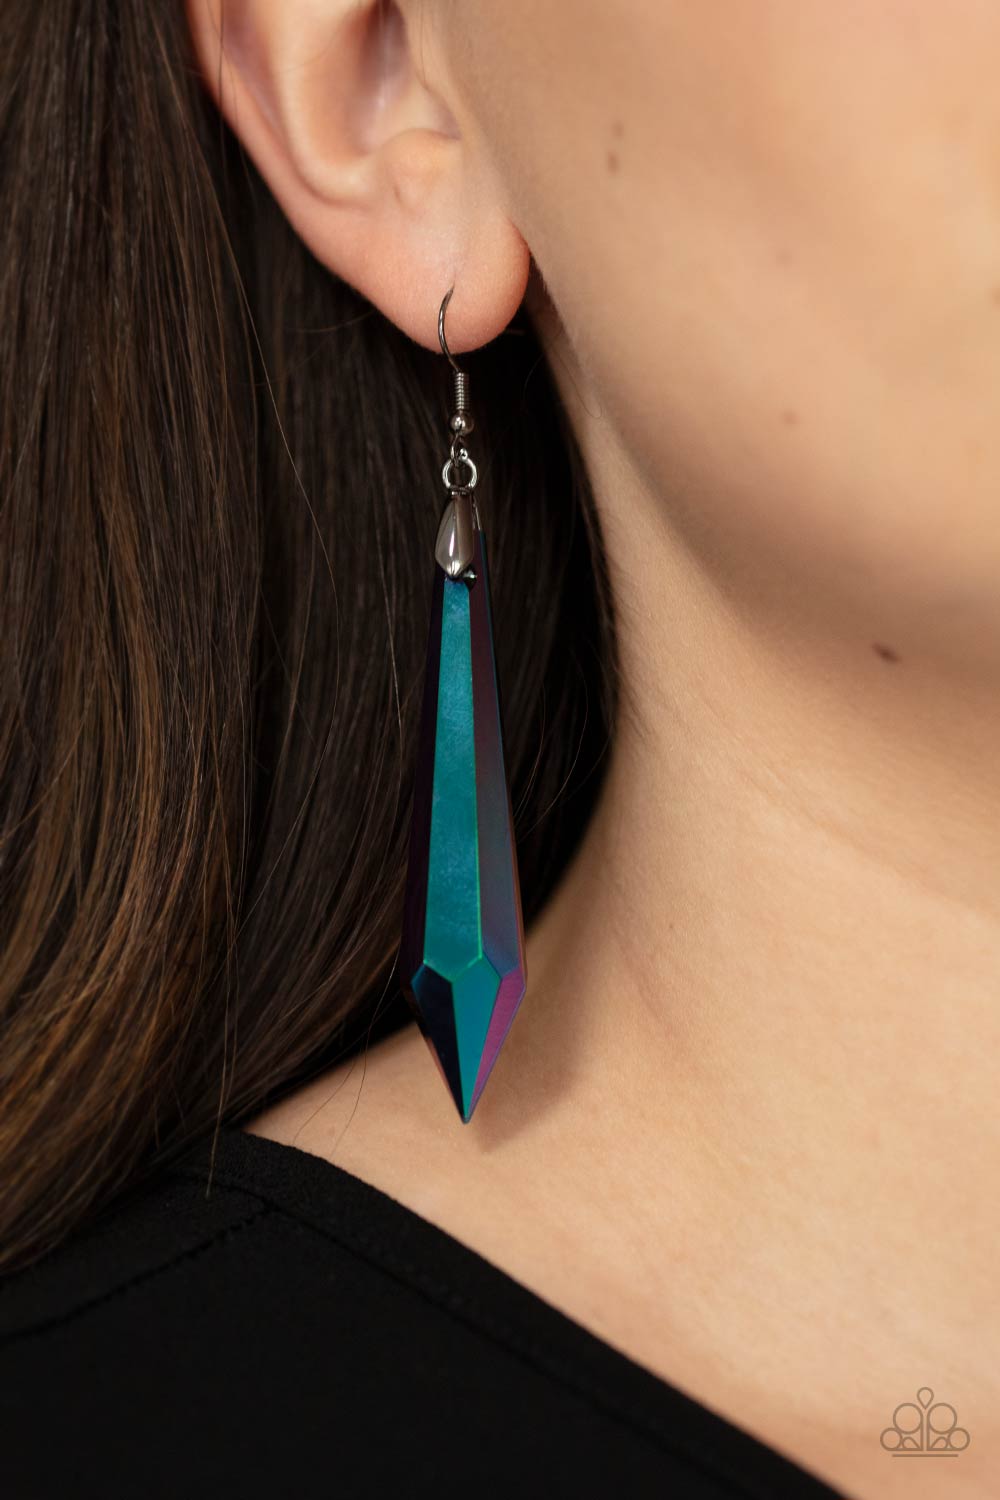 Sharp Dressed DIVA Multi Earring - Paparazzi Accessories  Featuring a stellar oil spill finish, a dramatically elongated gem attaches to a gunmetal fitting that swings from the ear for a hypnotizing fashion. Earring attaches to a standard fishhook fitting.  All Paparazzi Accessories are lead free and nickel free!  Sold as one pair of earrings.